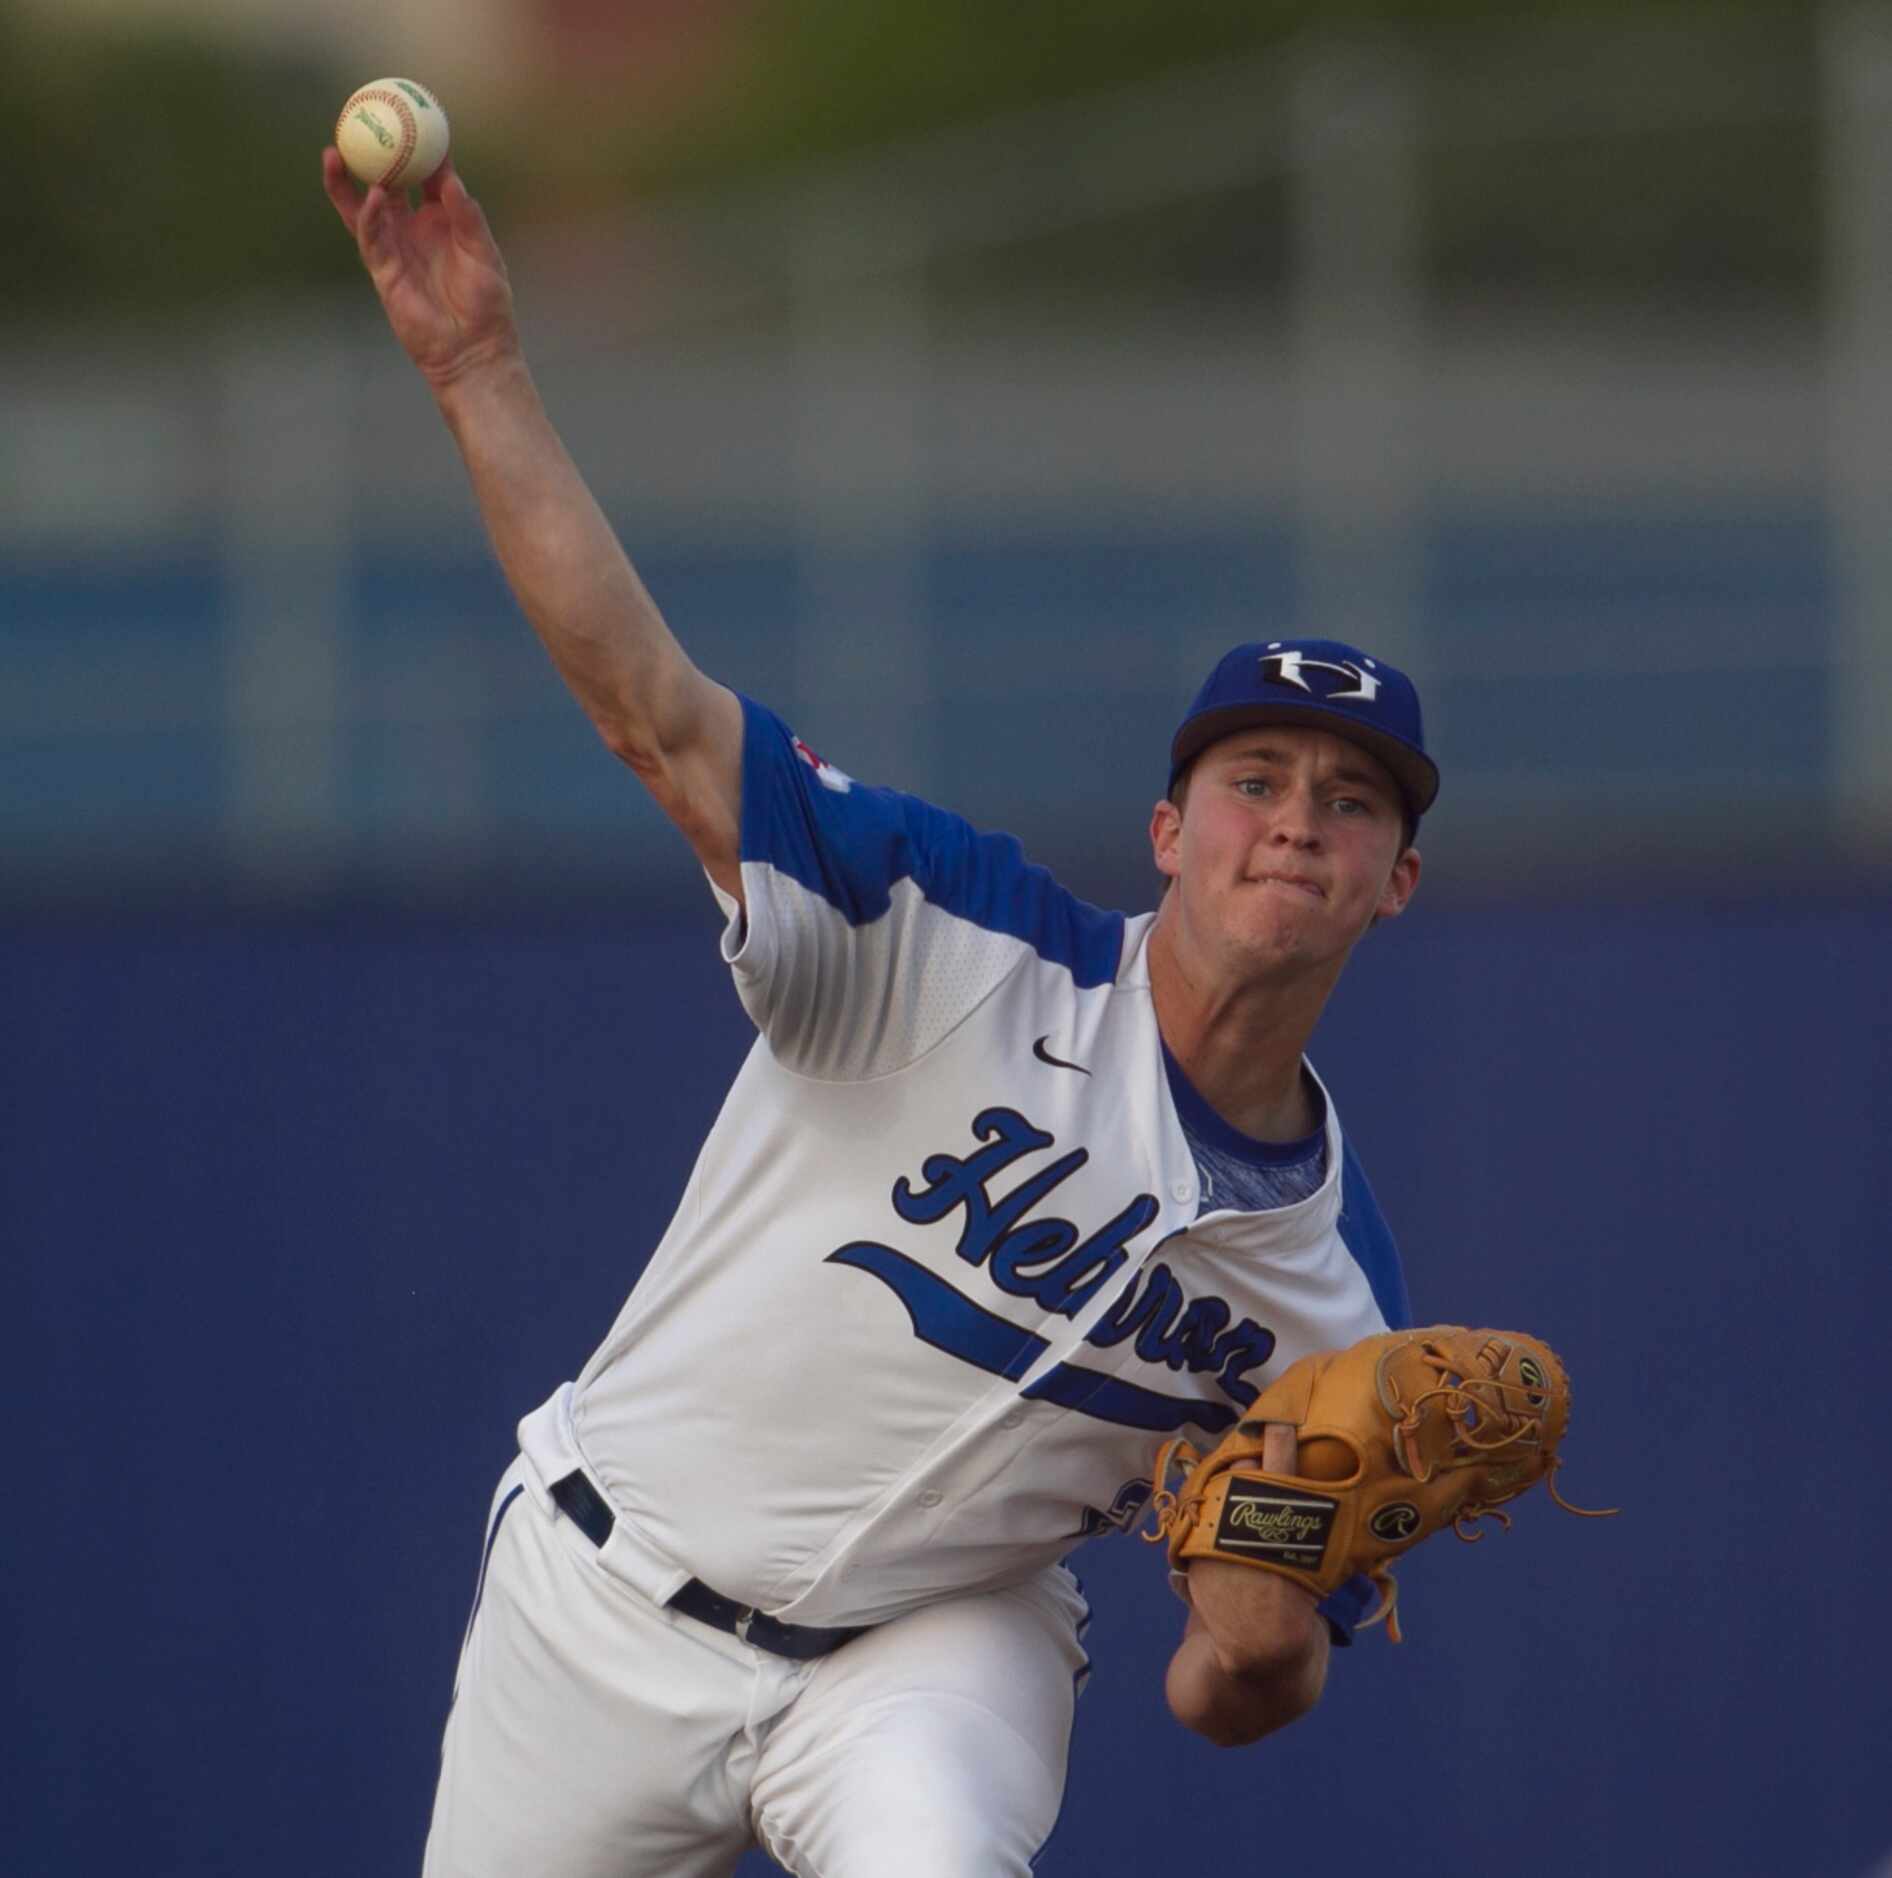 Hebron pitcher Jeremy Slate (2) delivers a pitch to a Coppell batter during the top of the...